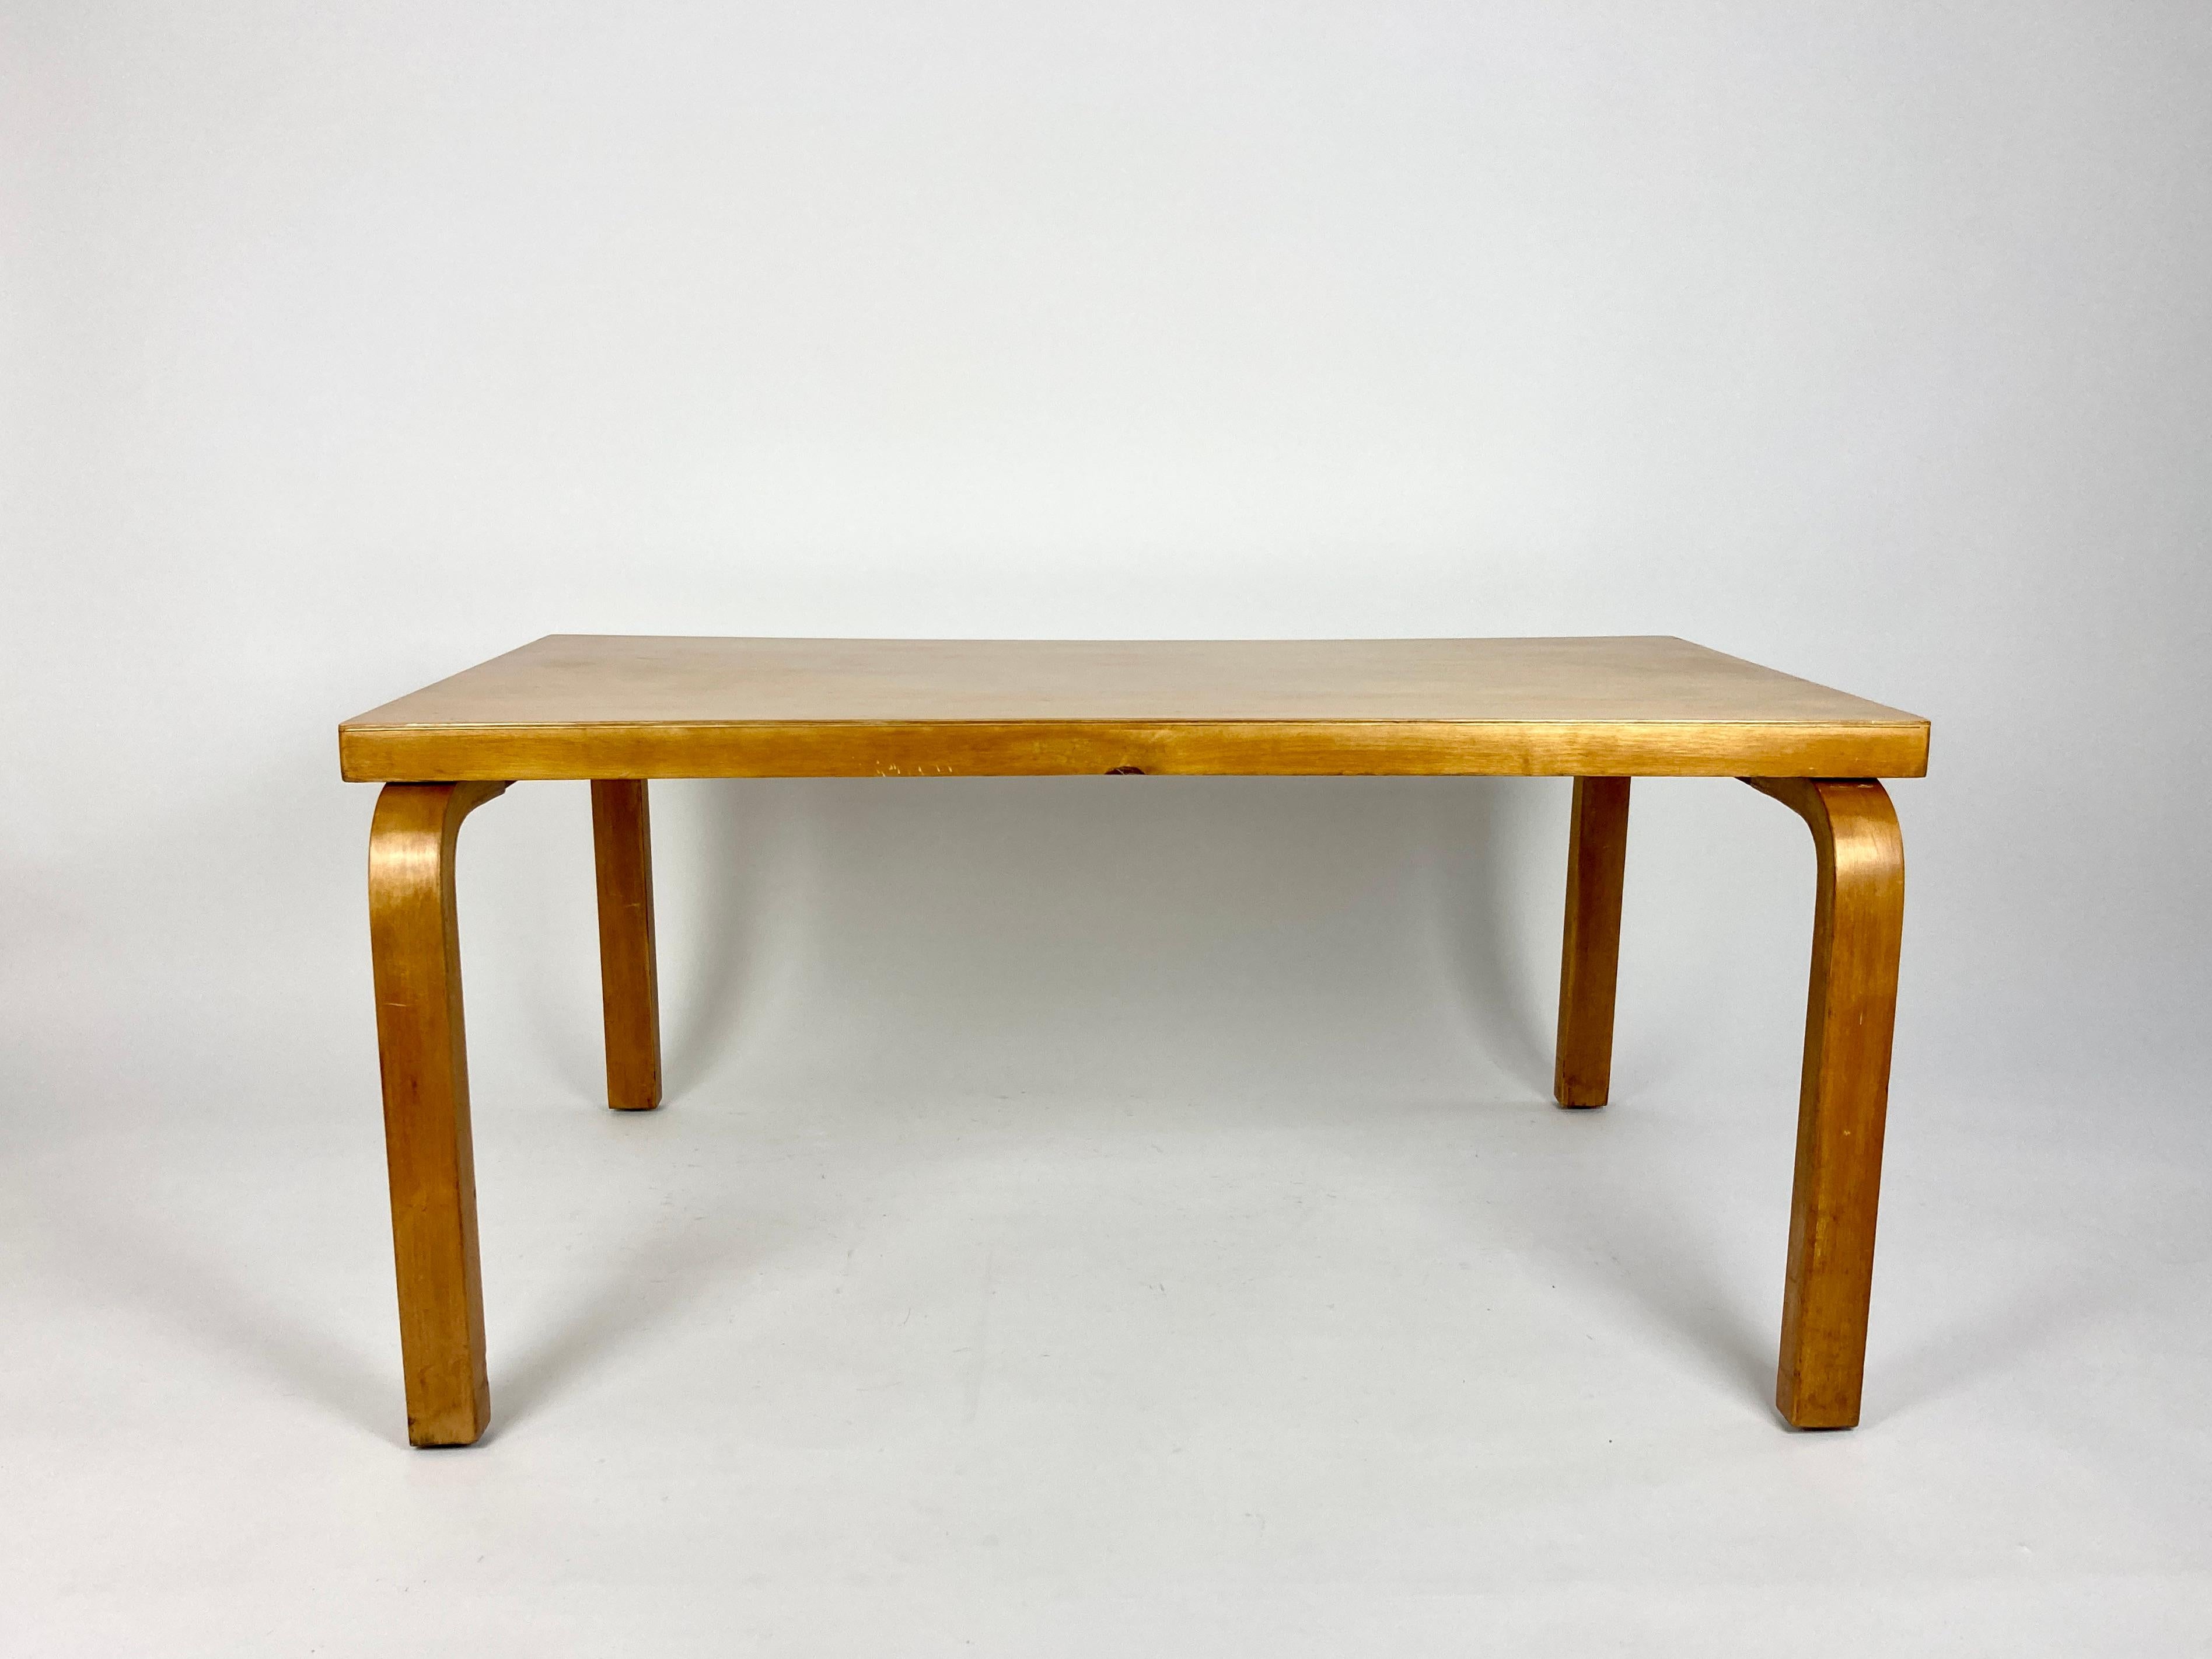 Early production low rectangular table by Alvar Aalto.

Owned by the previous owners from new, the table was in the same family since the 1930s.

Made of birch, the wood has a great golden tone. The top was refinished by the previous owners about 20